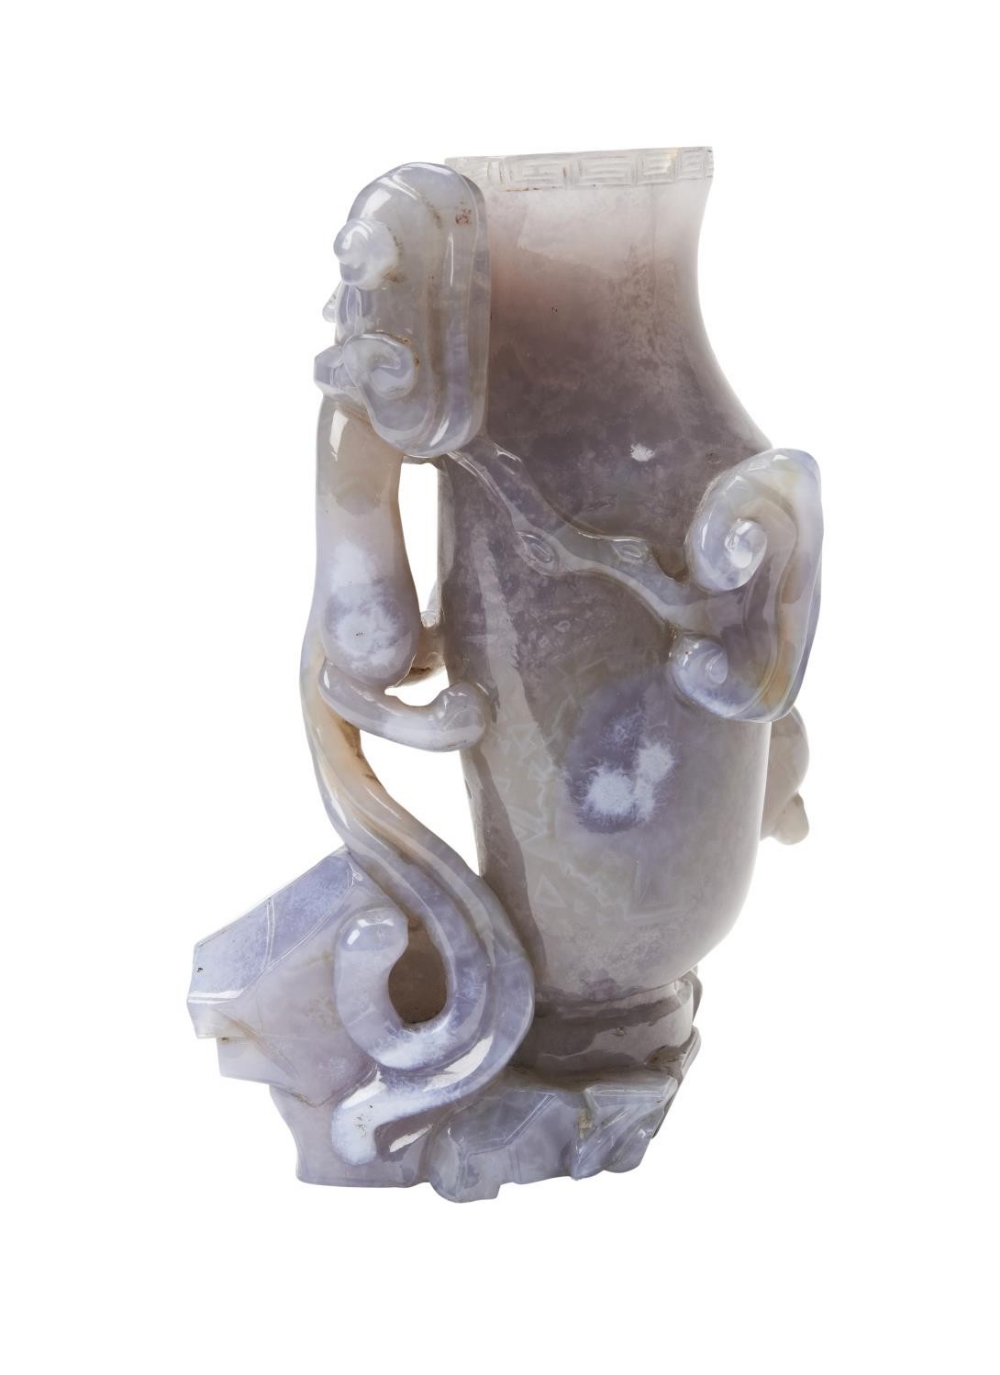 CARVED AGATE 'CHILONG' VASE ROSE QUARTZ HORSE QING DYNASTY,  18TH / 19TH CENTURY the baluster sides  - Image 2 of 2